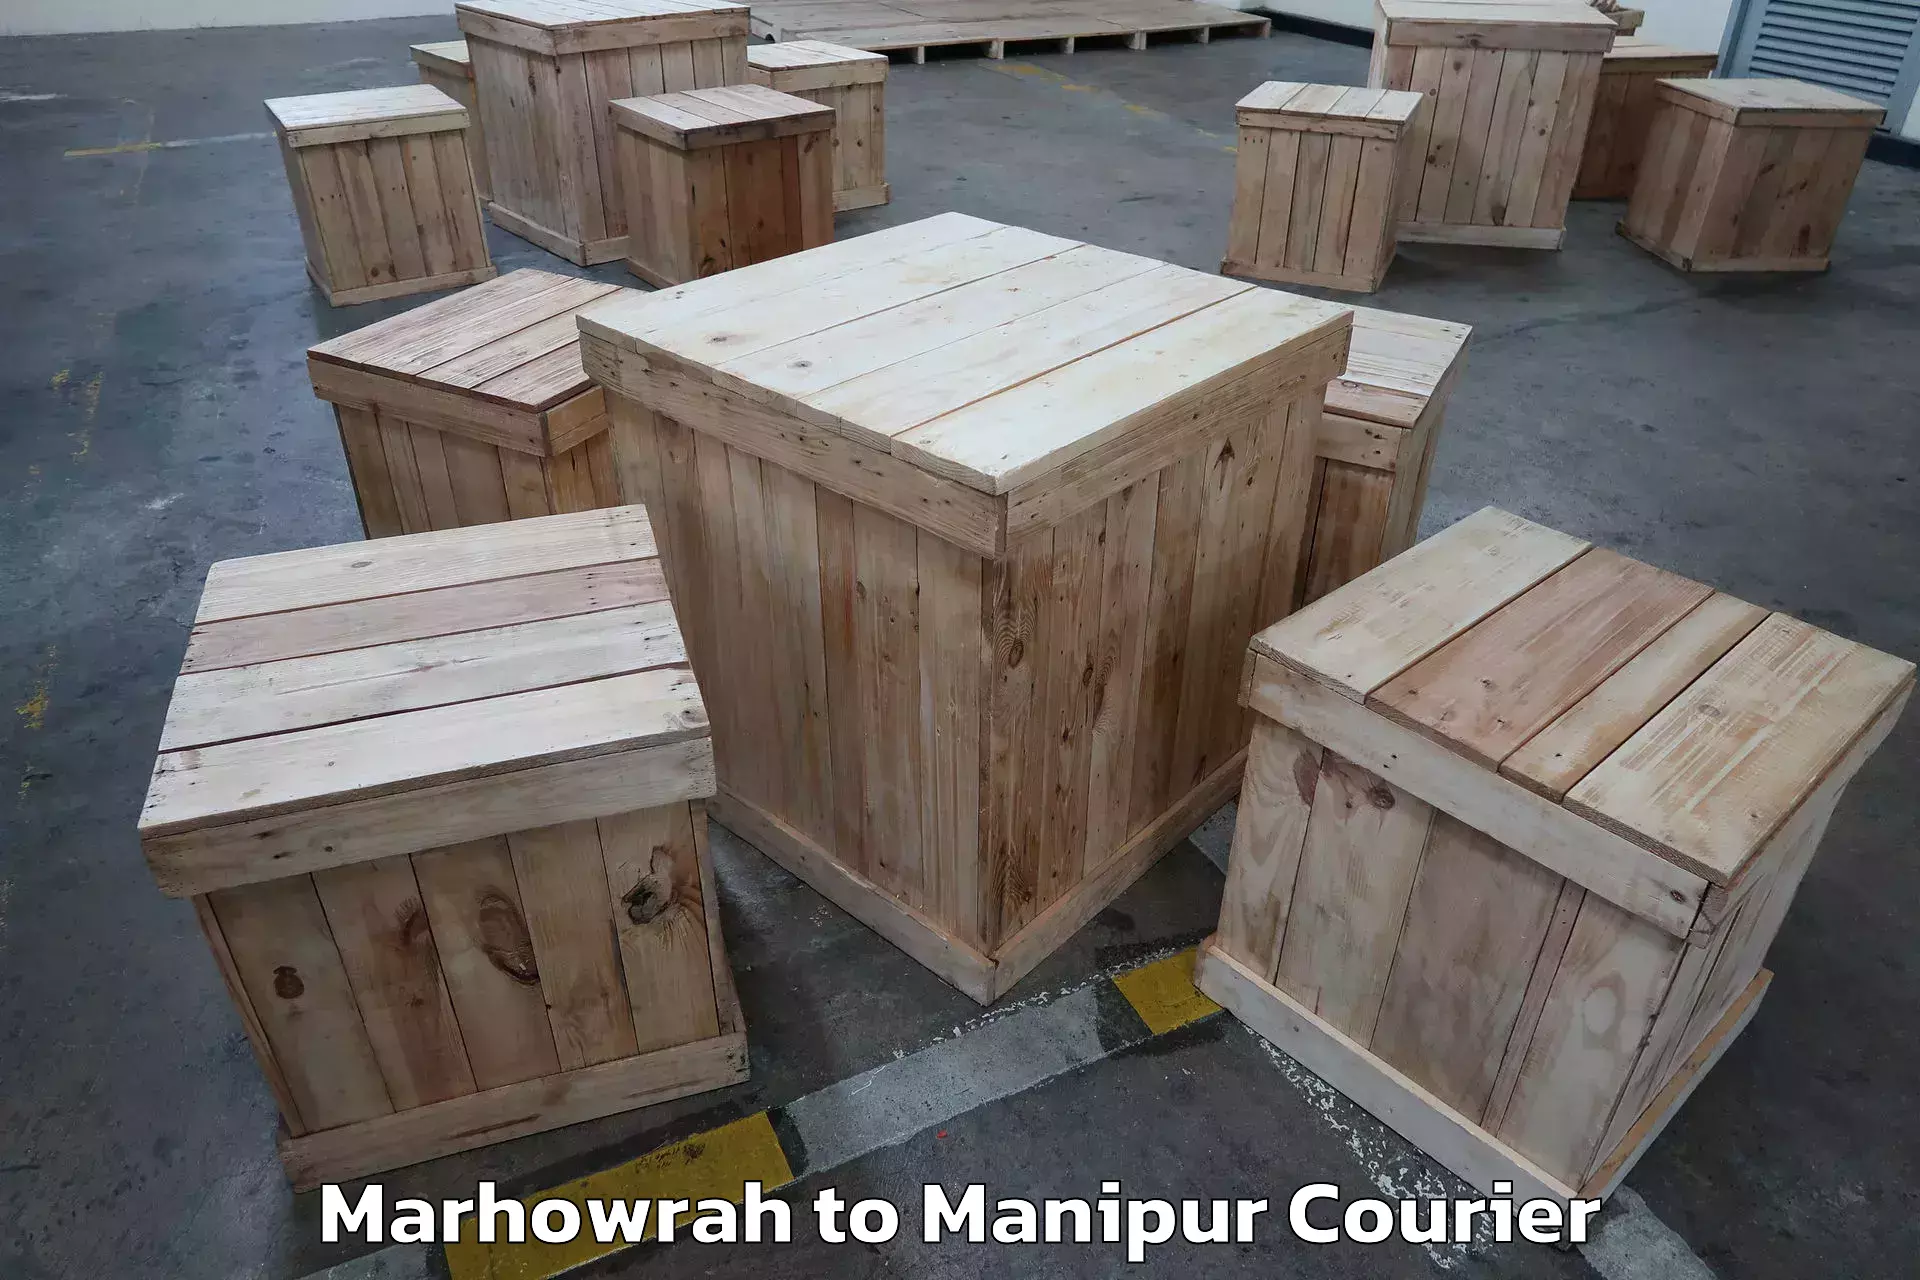 Expert goods movers Marhowrah to Manipur